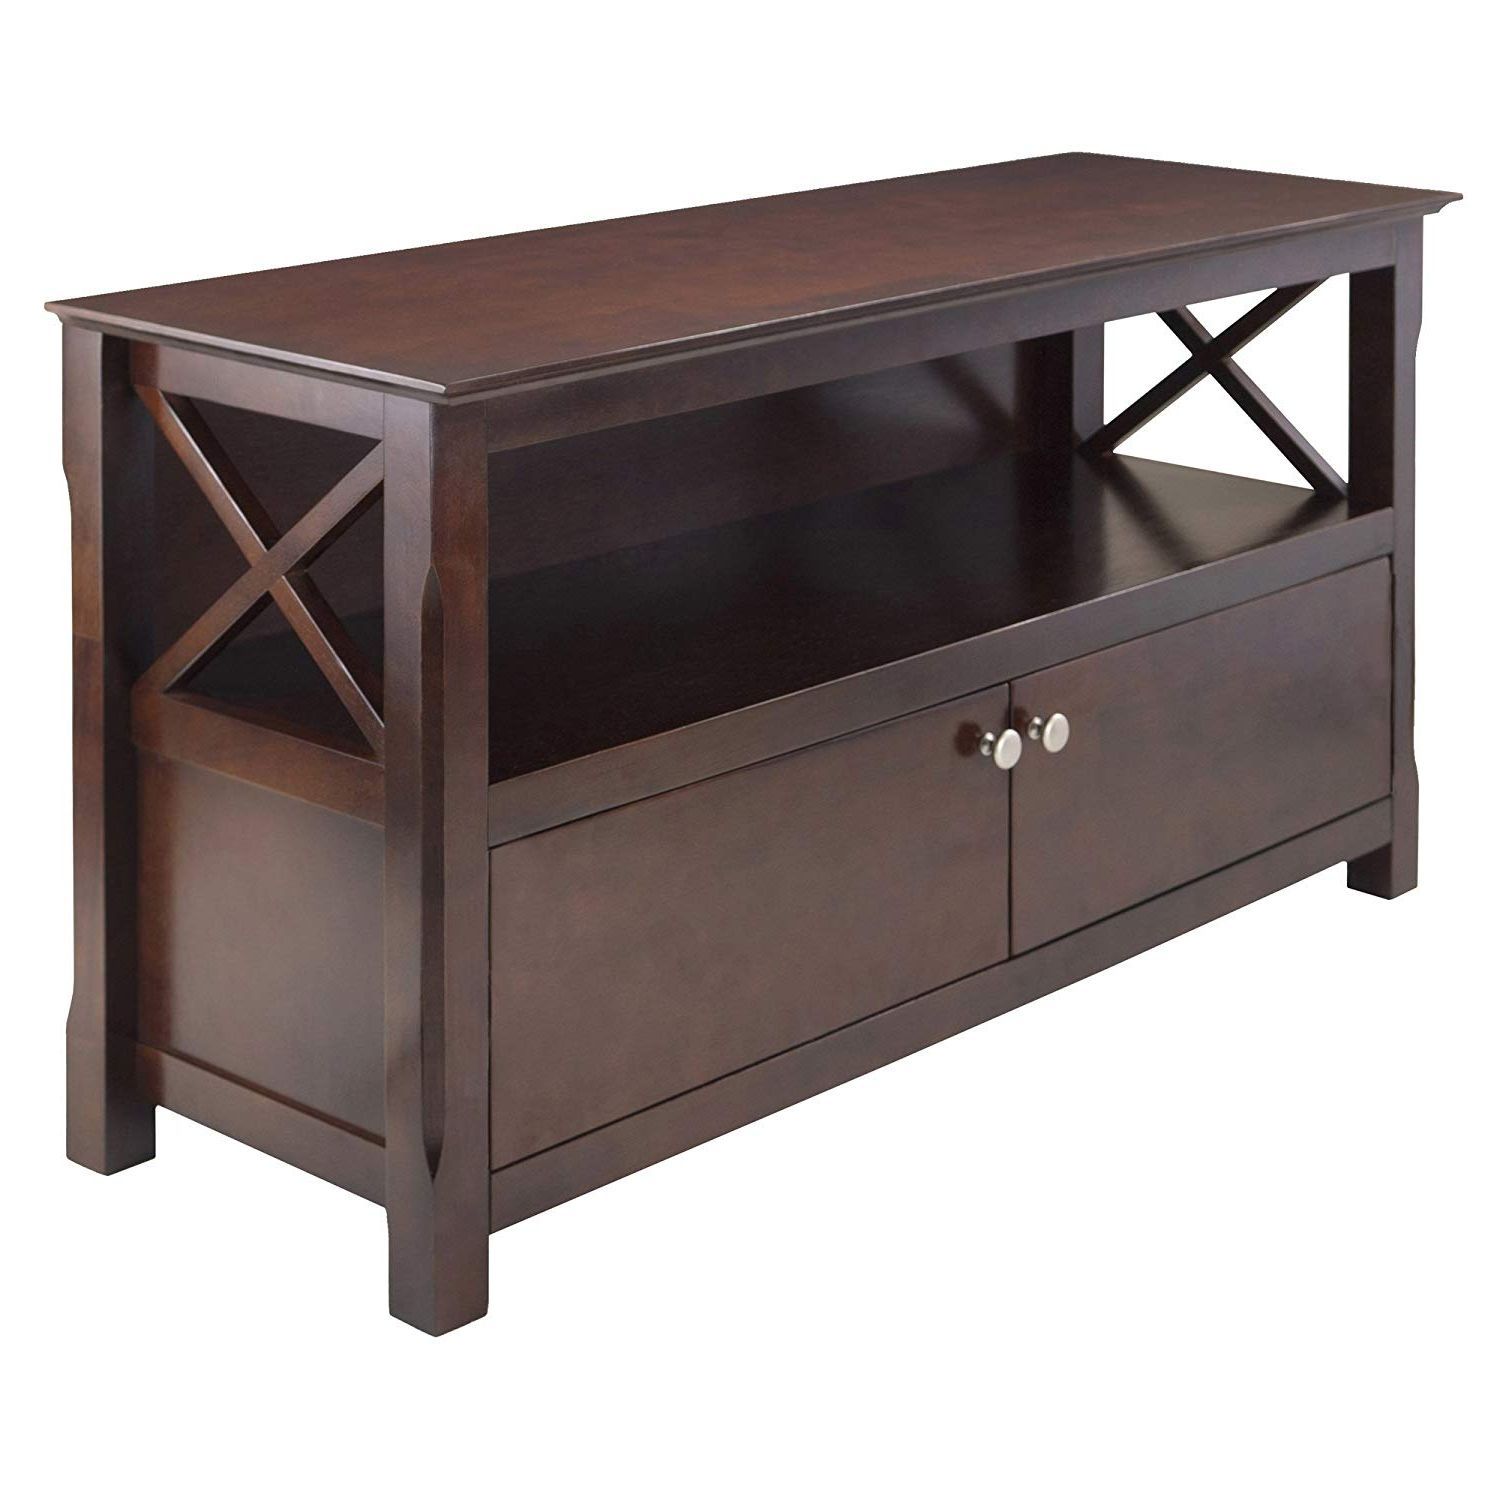 Amazon: Winsome Wood Xola Tv Stand: Kitchen & Dining With Best And Newest Tv Tables (View 1 of 20)